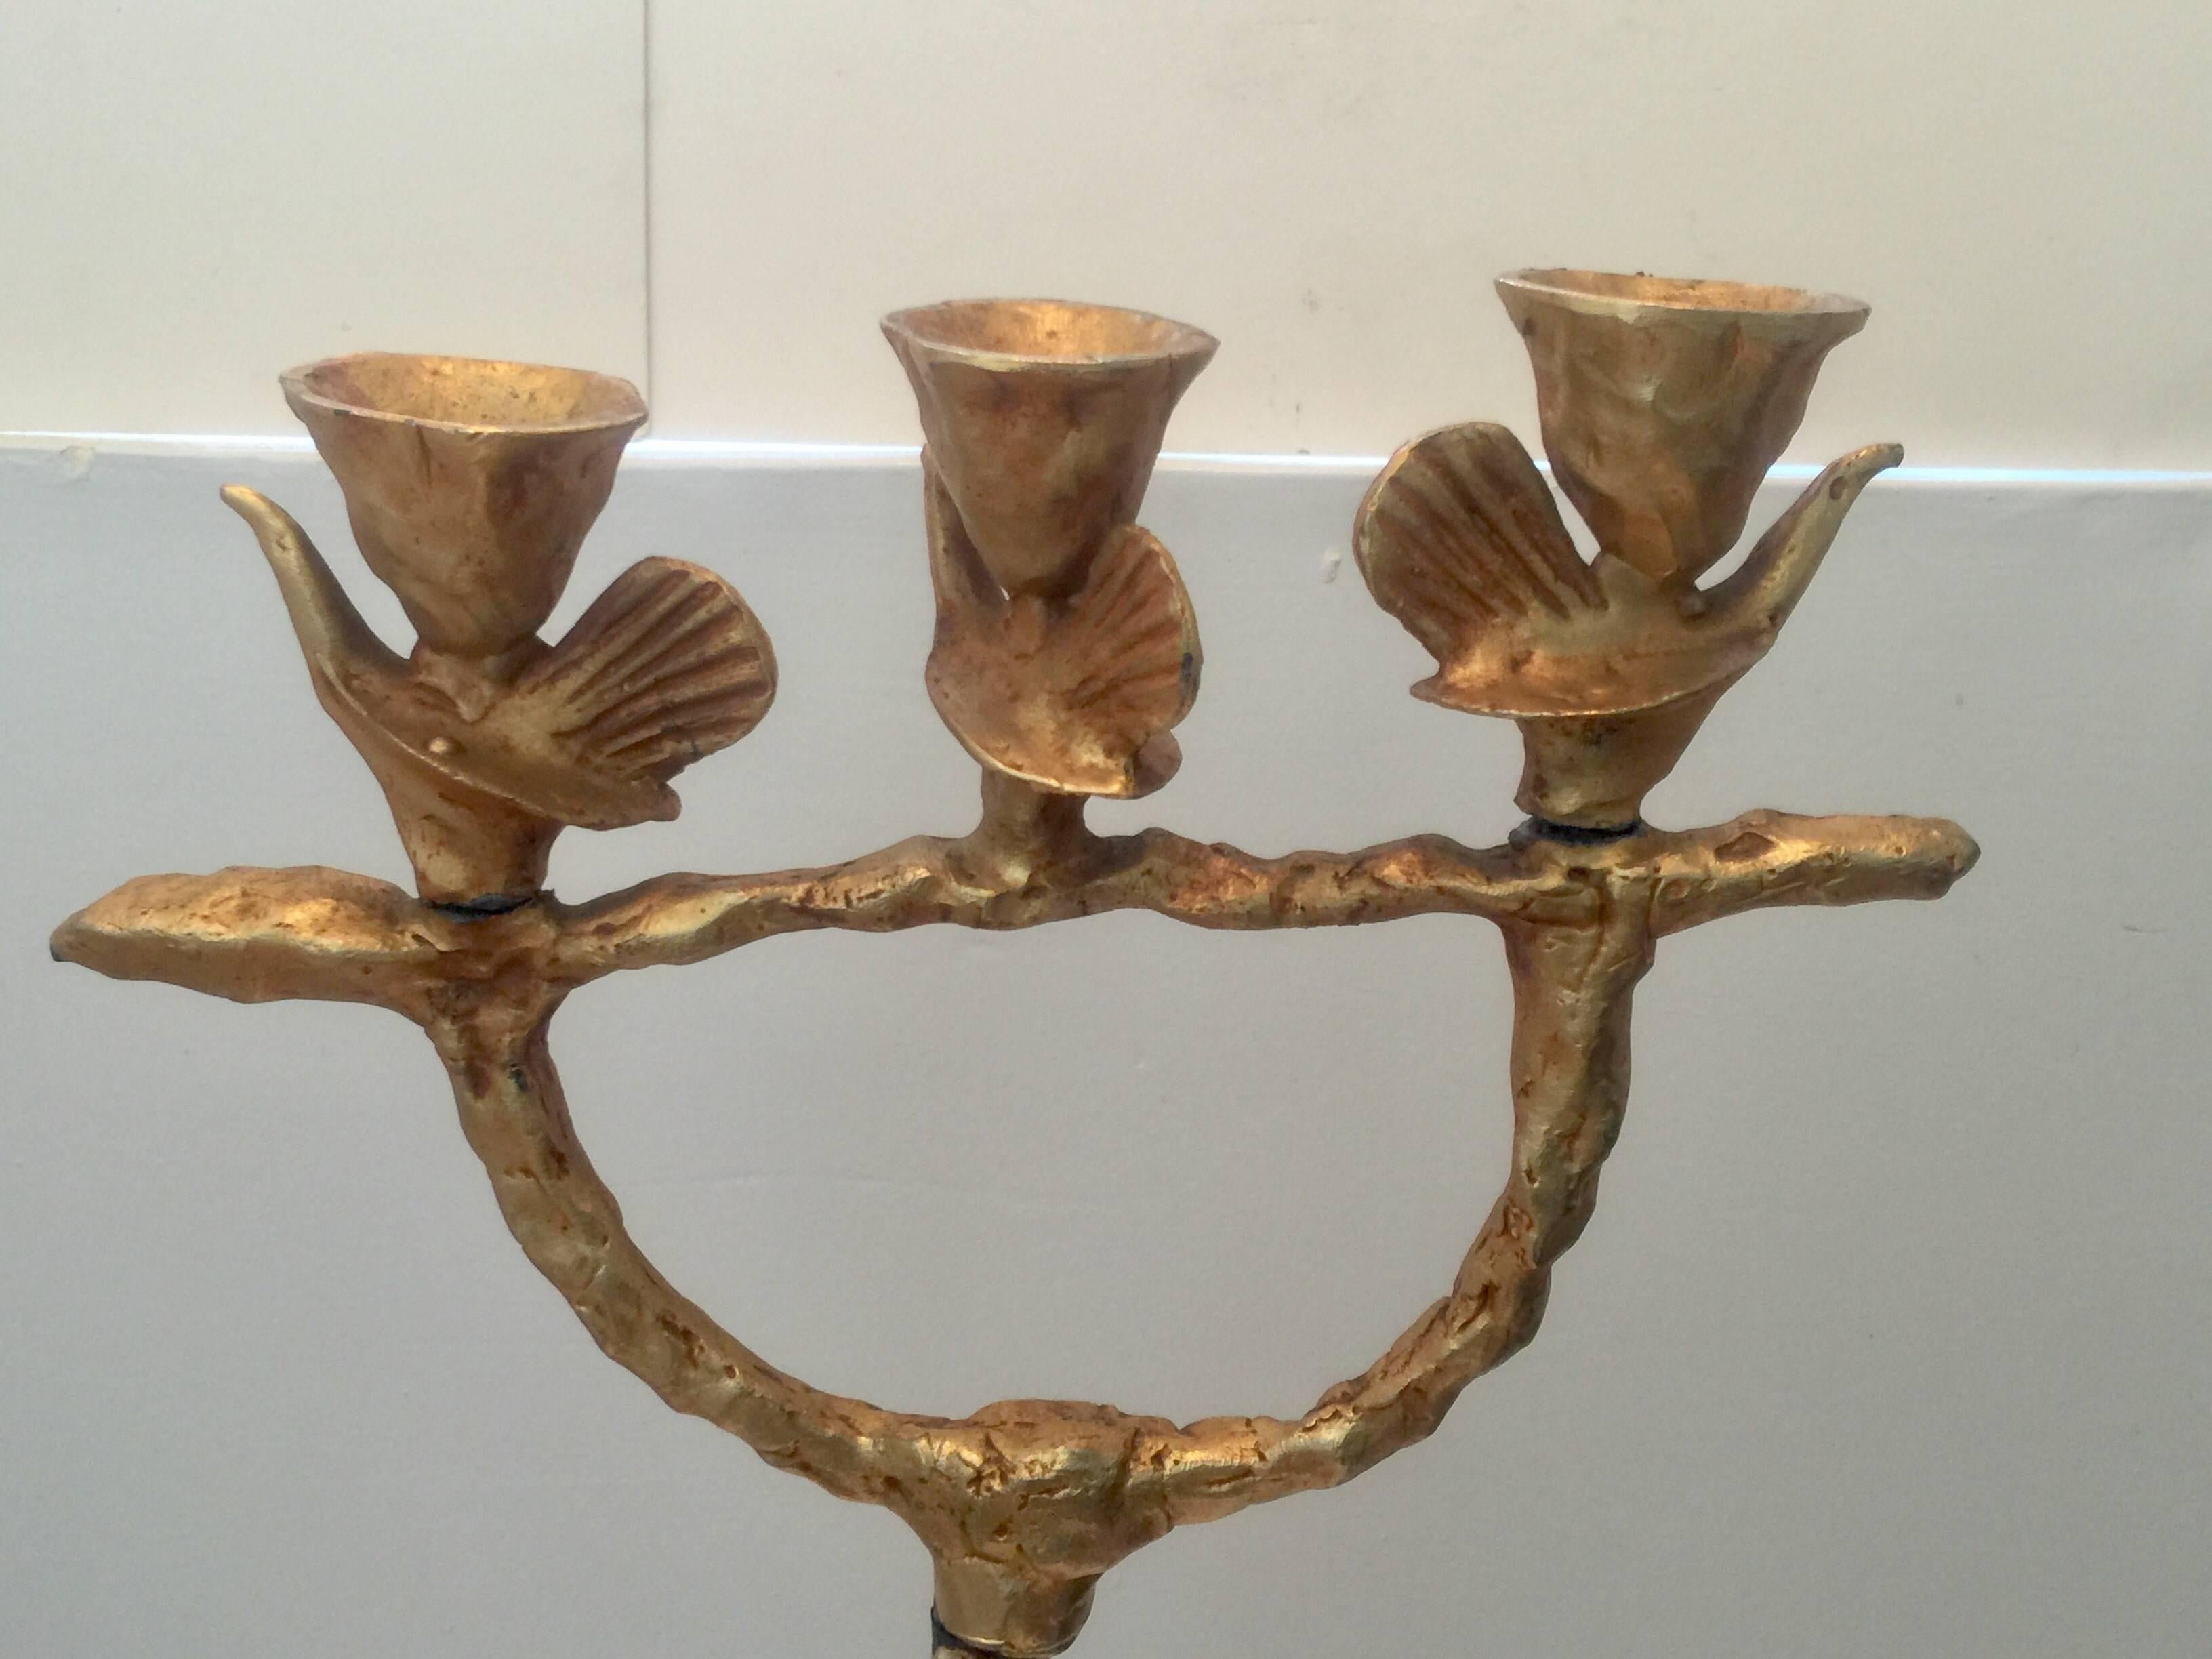 Gilded bronze candleholder by Pierre Casenove. Signed on the bottom piece. Has some wear on some joints.